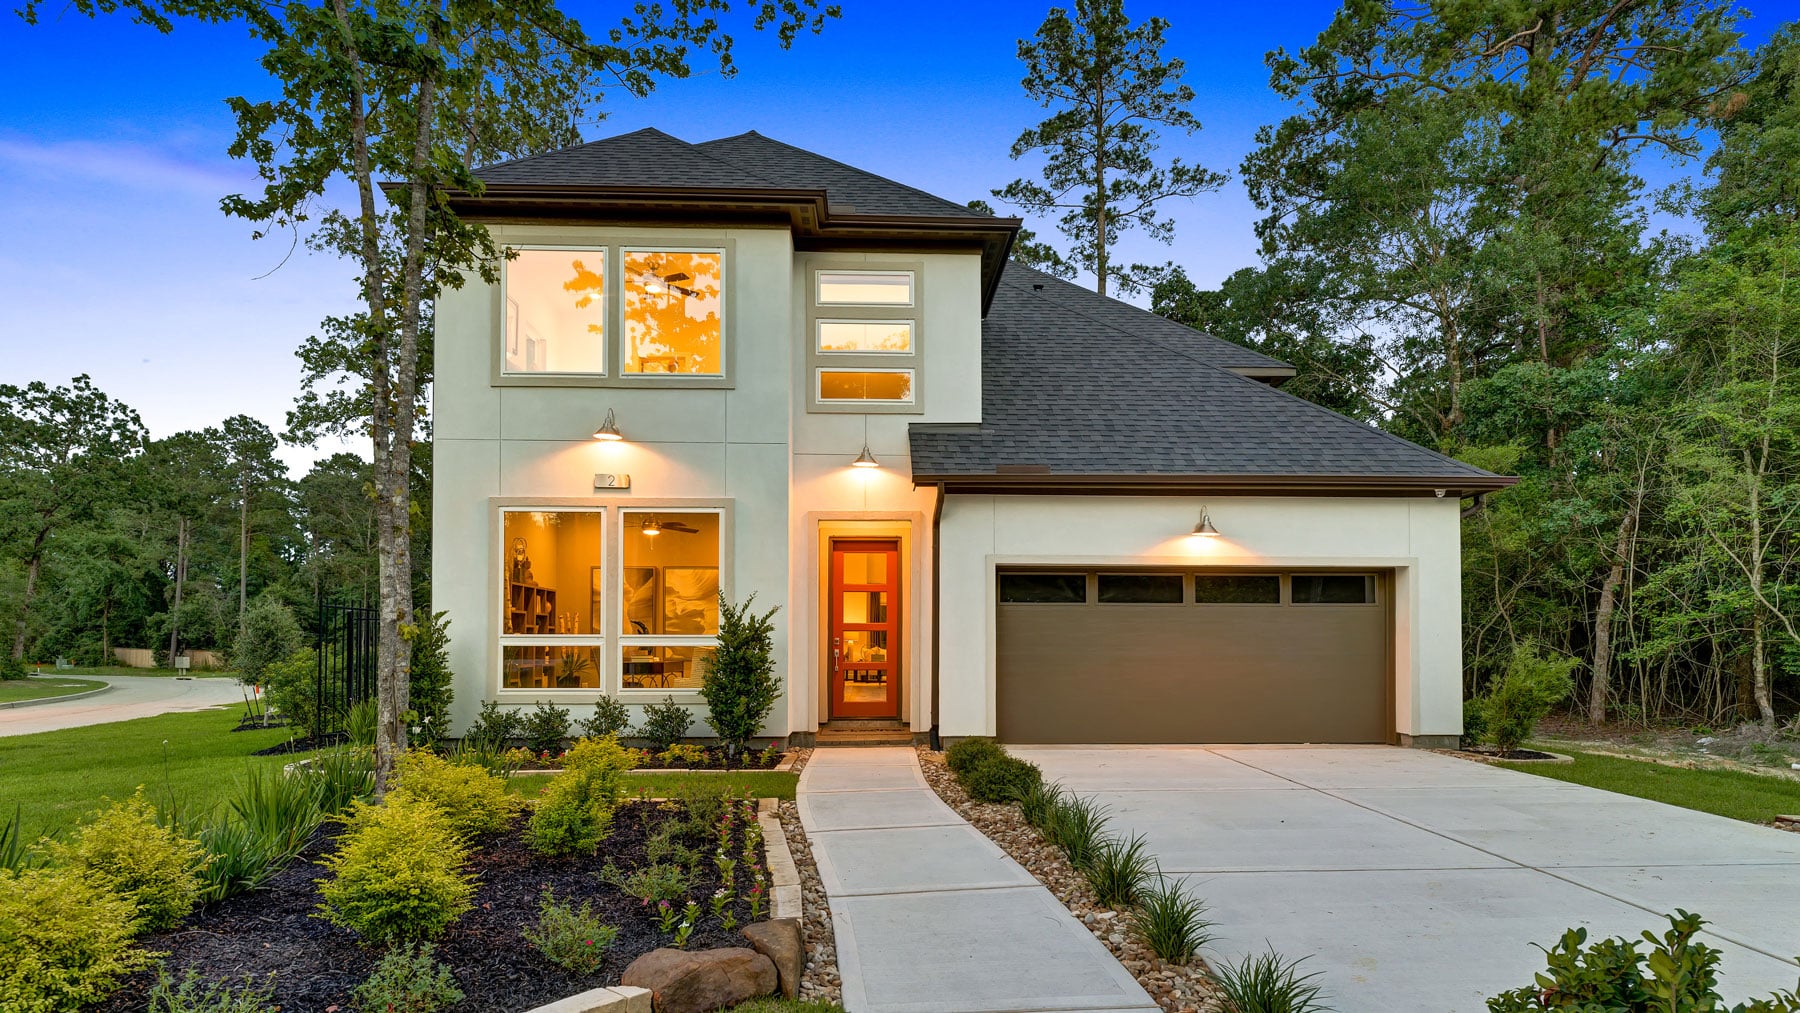 The Woodlands Texas Real Estate - Woodlands New Homes